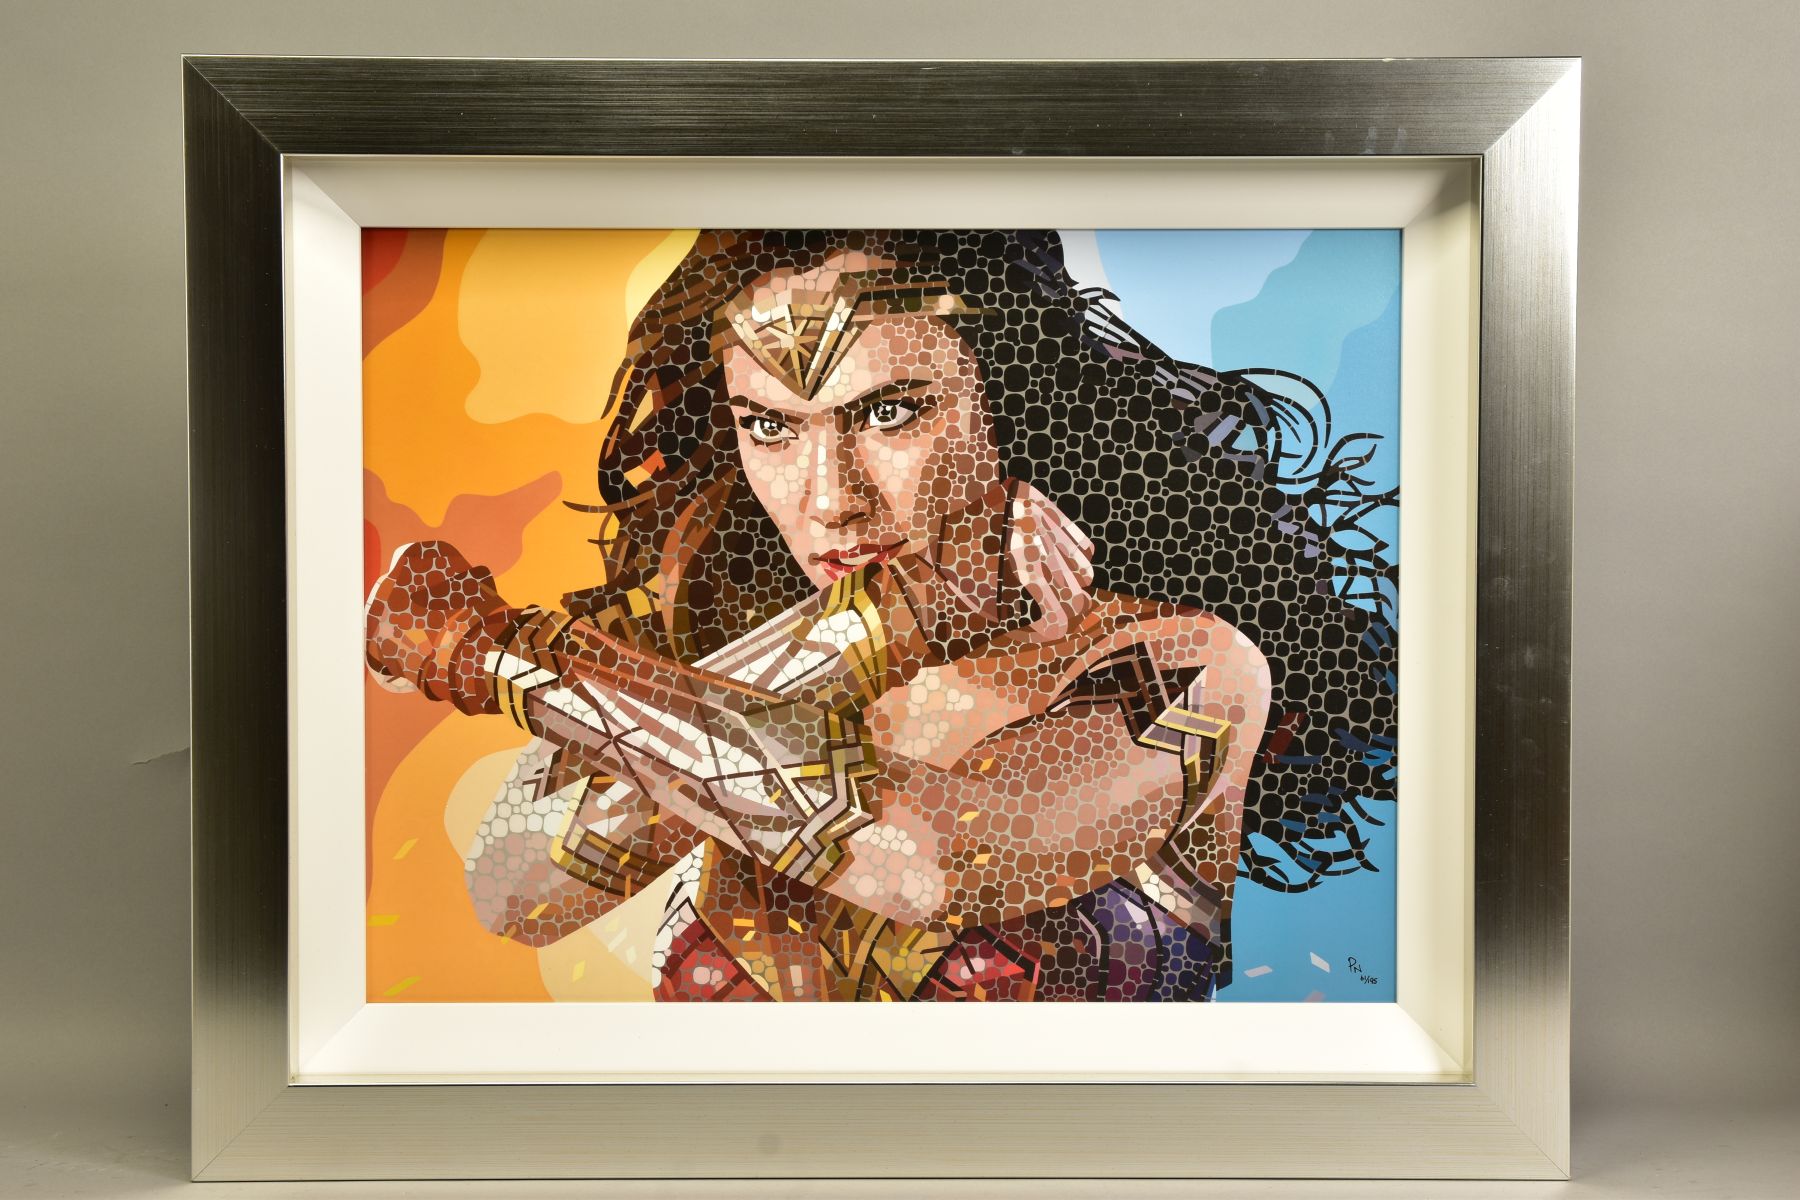 PAUL NORMANSELL (BRITISH 1978) 'THE TIME IS NOW', a limited edition print of Gal Gadot as Wonder